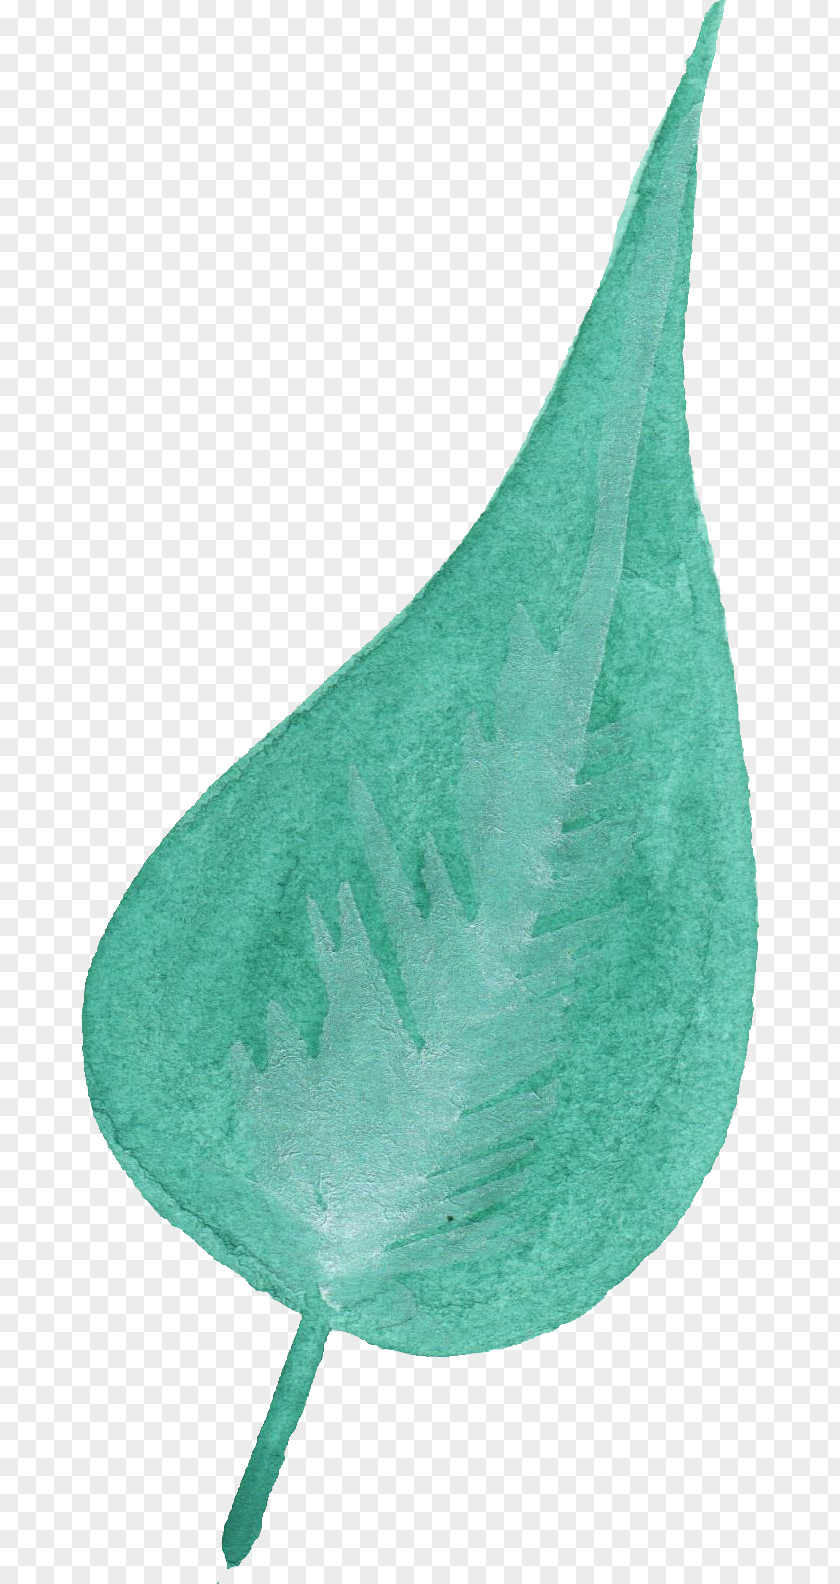 Watercolor Leaves Leaf Teal Turquoise PNG